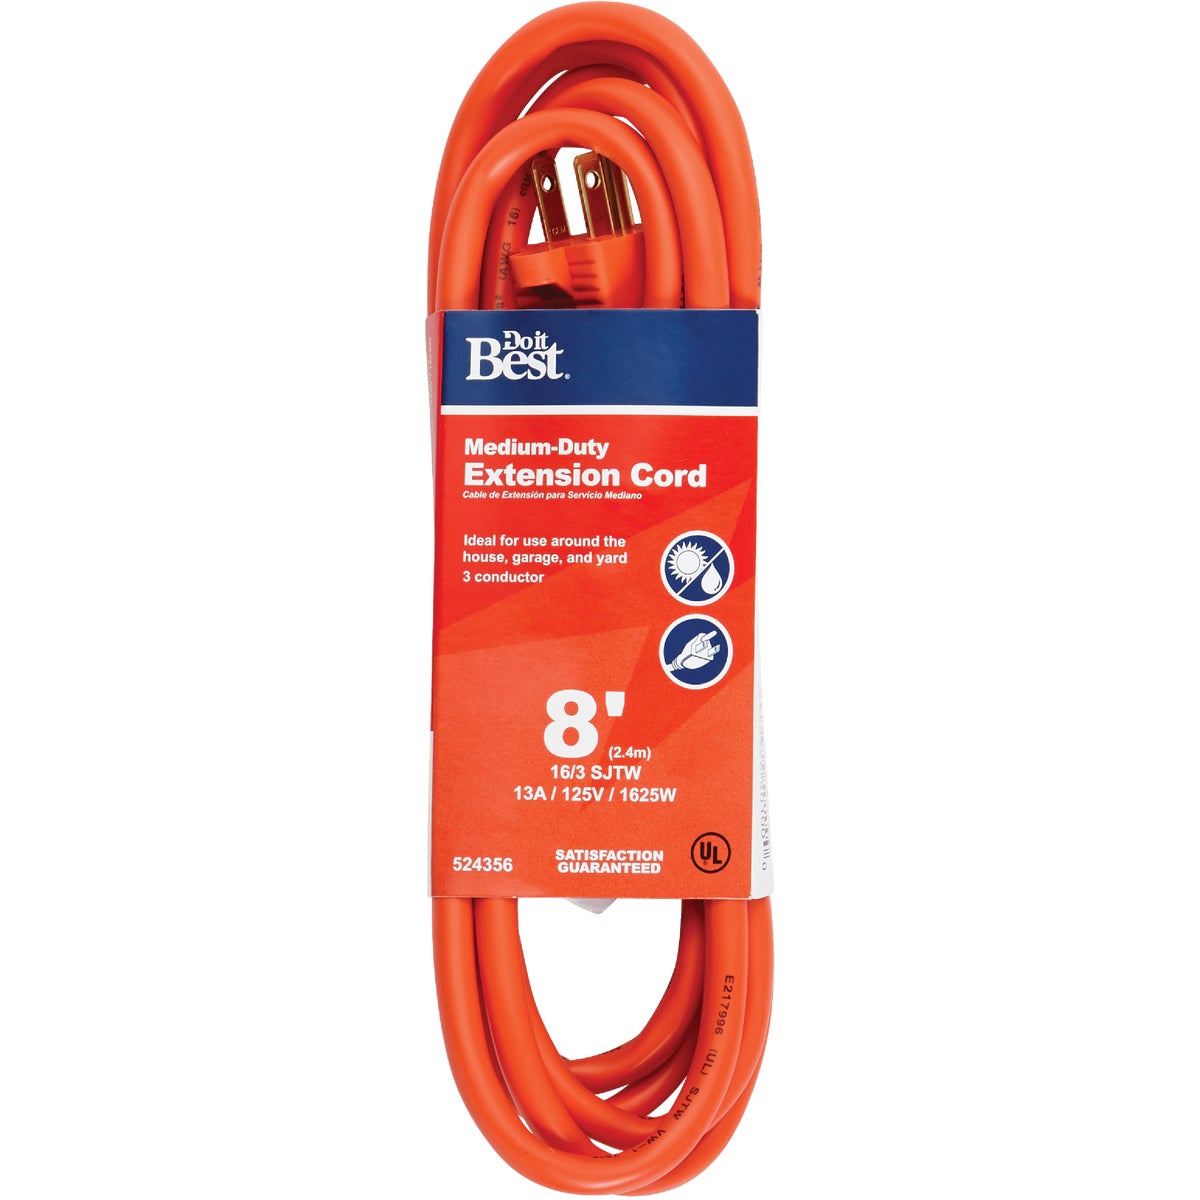 Item 524356, 16-gauge/3-conductor, SJTW medium-duty, all-weather extension cord.